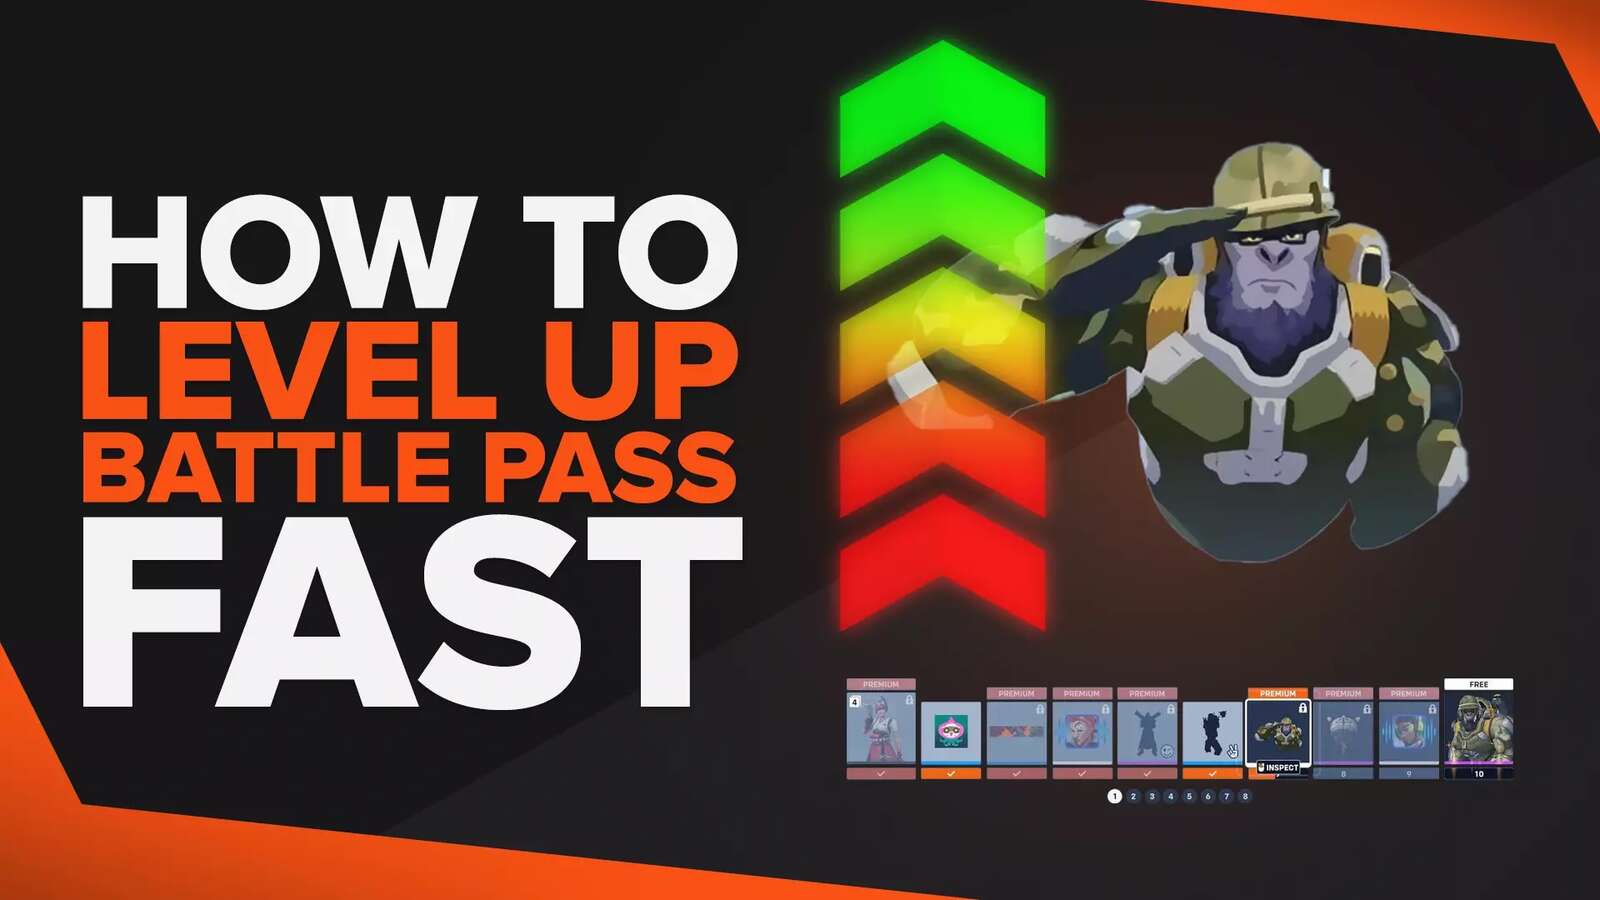 5 Easy Ways To Level Up Battle Pass Fast in Overwatch 2